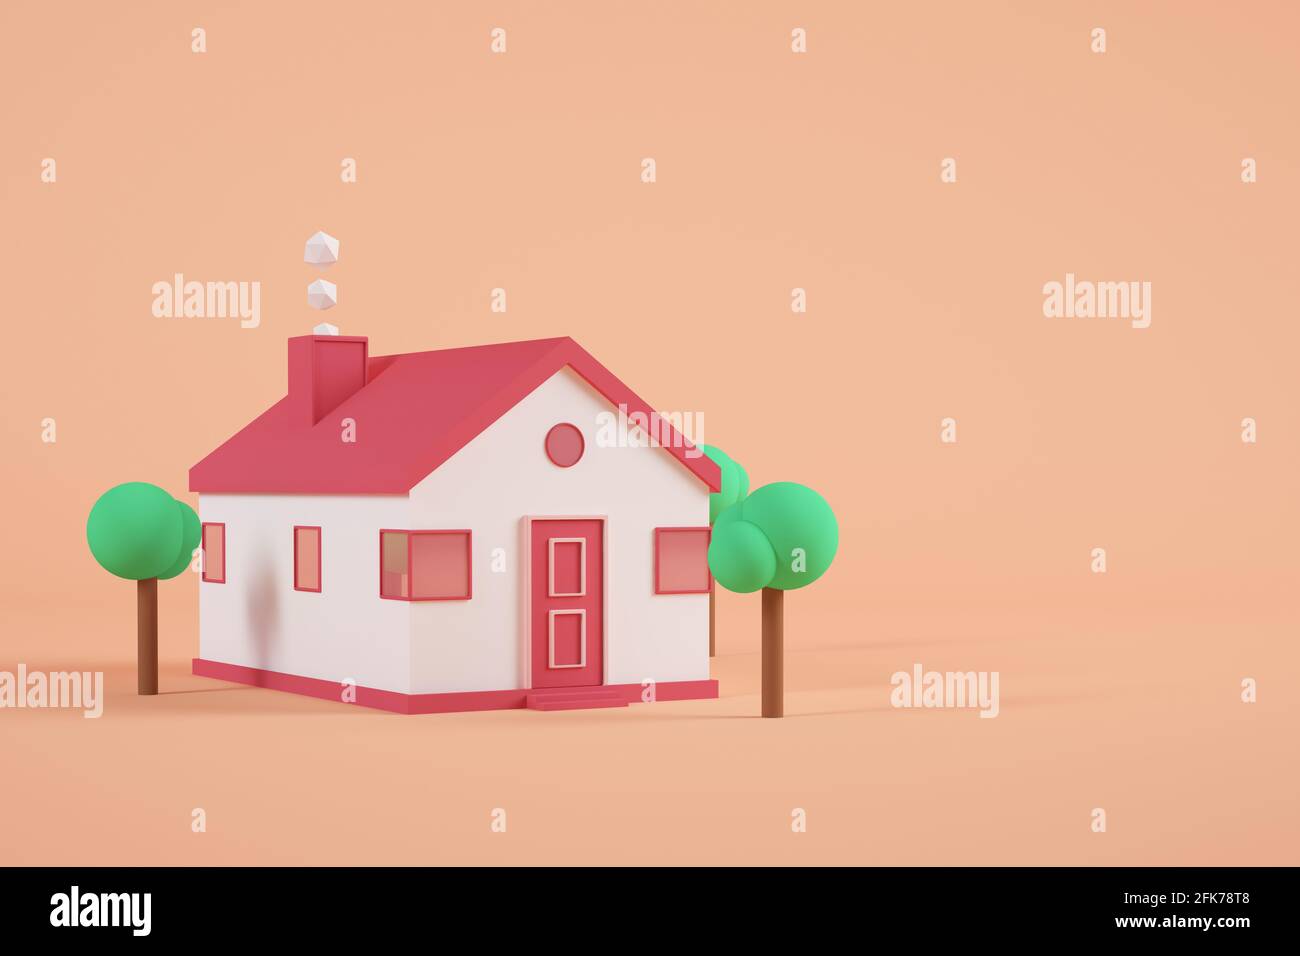 3d rendering of a pink house Stock Photo